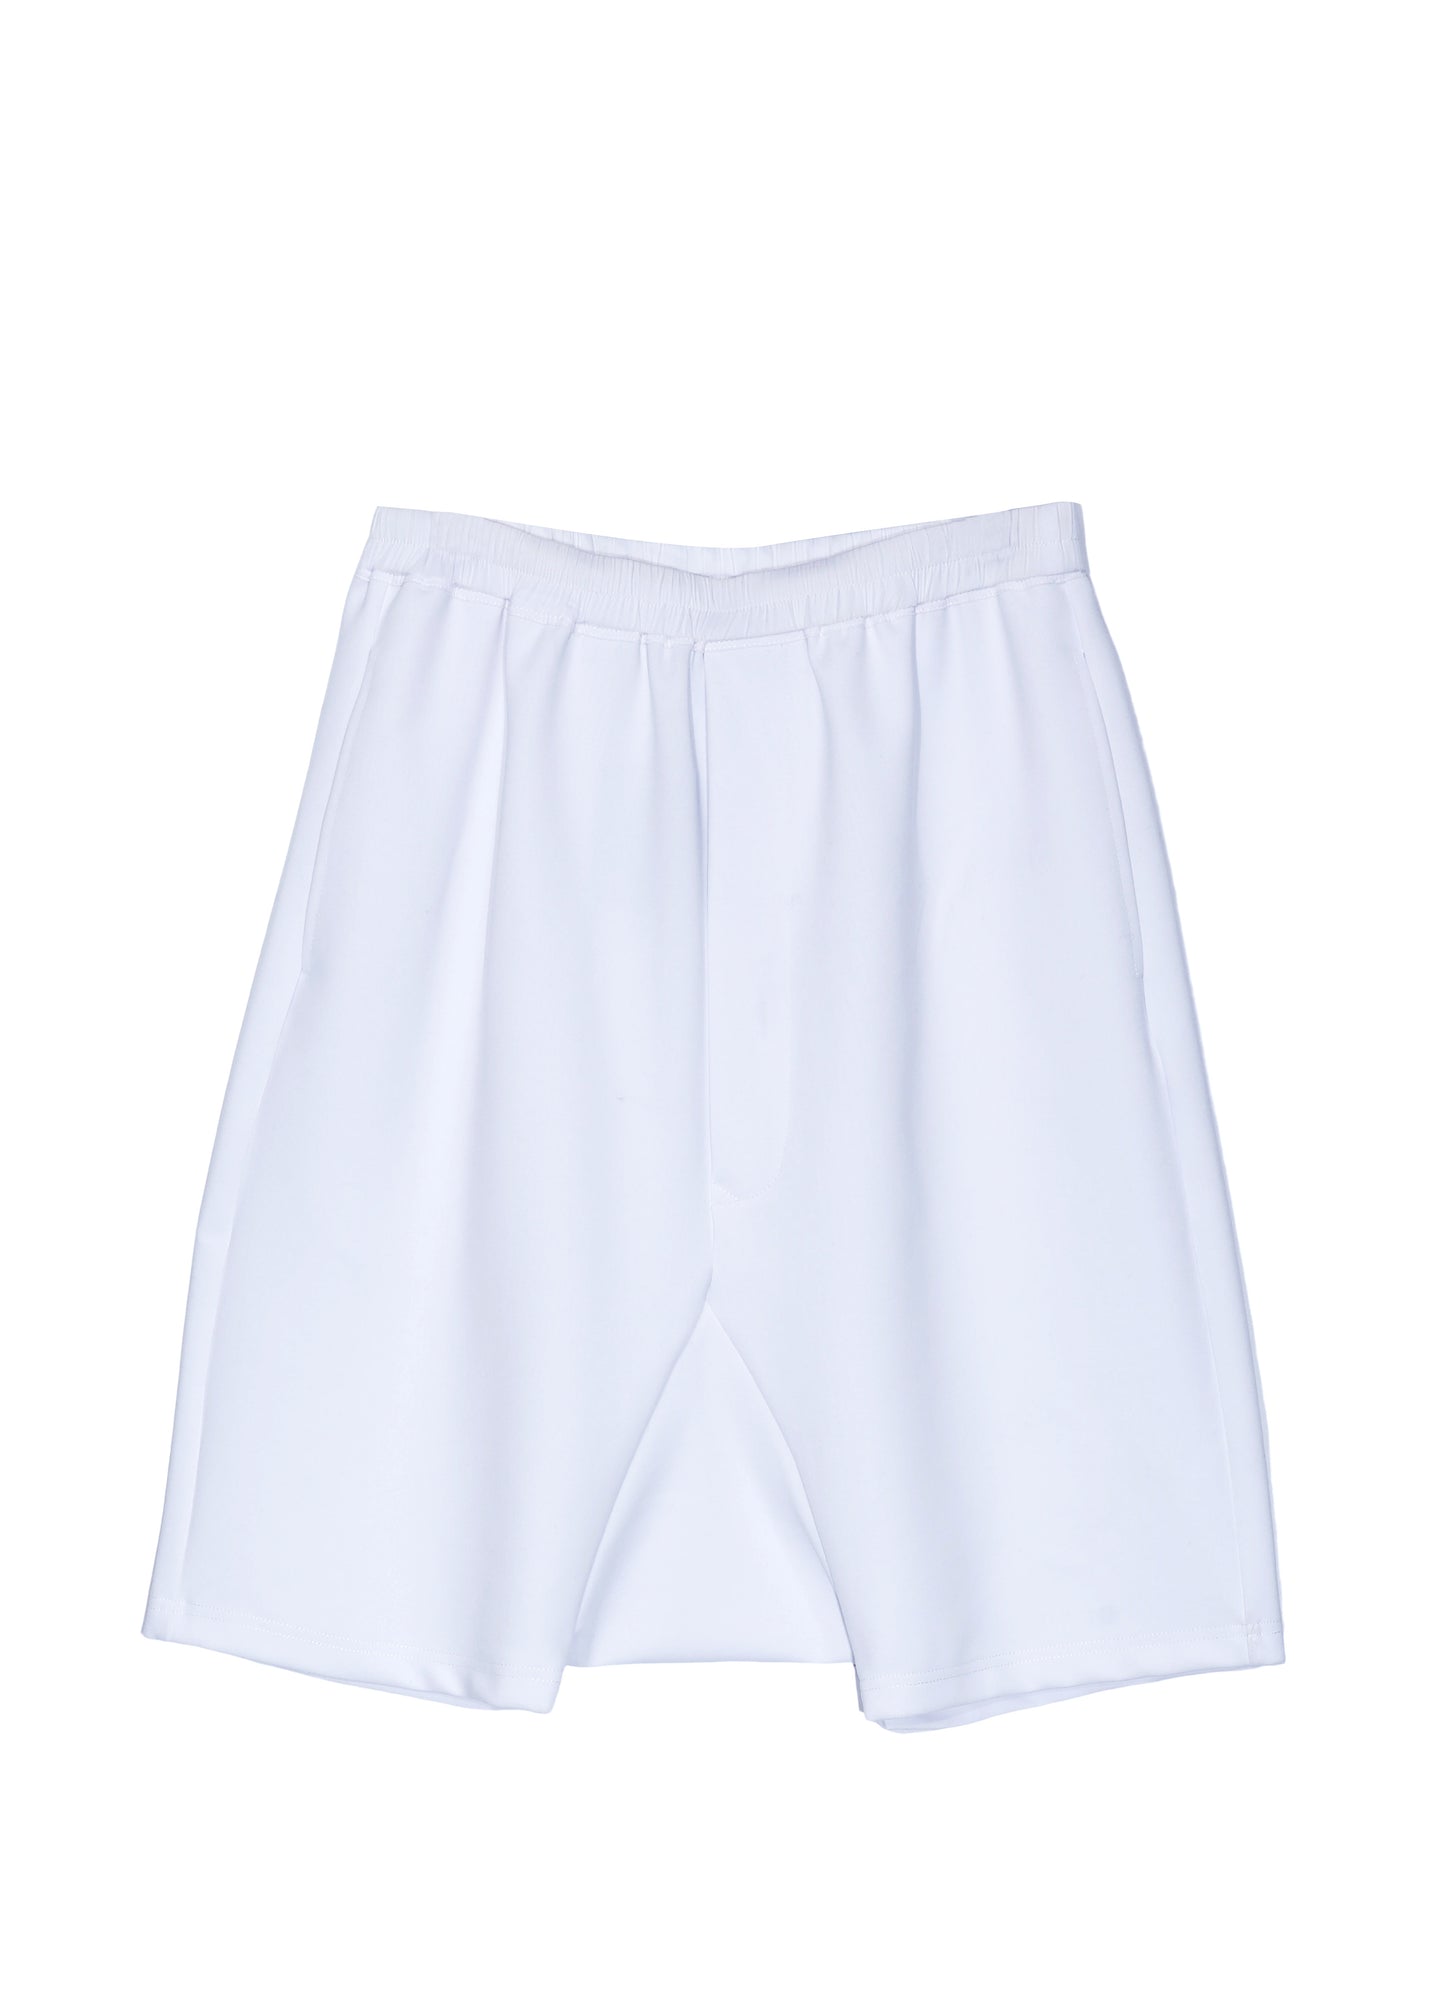 LOW- END SHORTS low-end shorts 